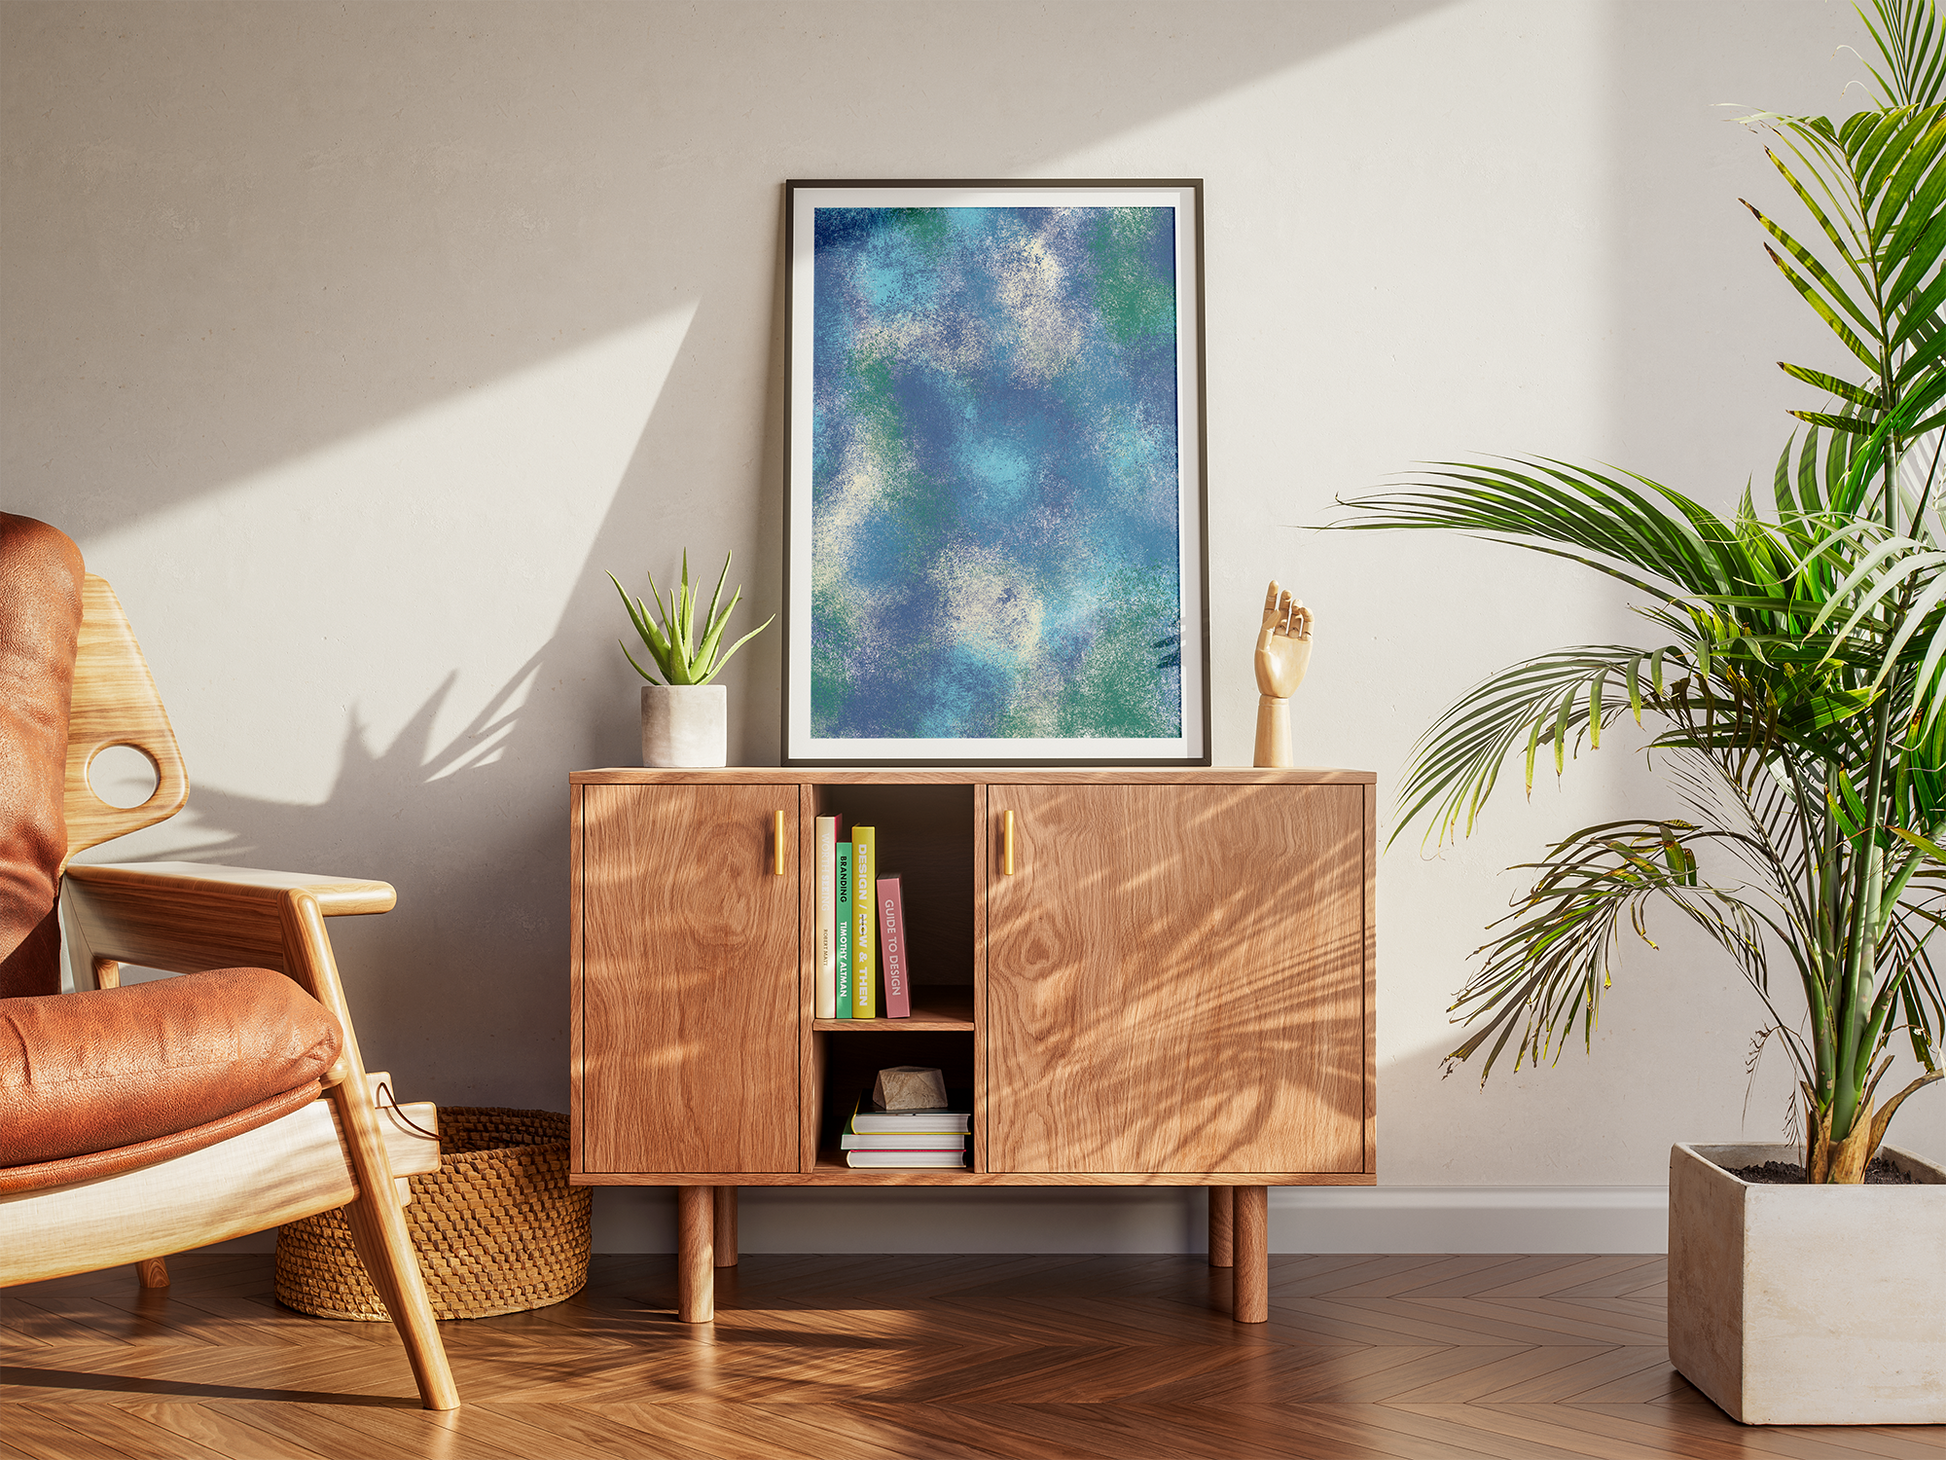 Modern free printable digital artwork with deep blue and green hues, reminiscent of a serene ocean, displayed on a sideboard with simple decor, contributing to a sustainable home aesthetic